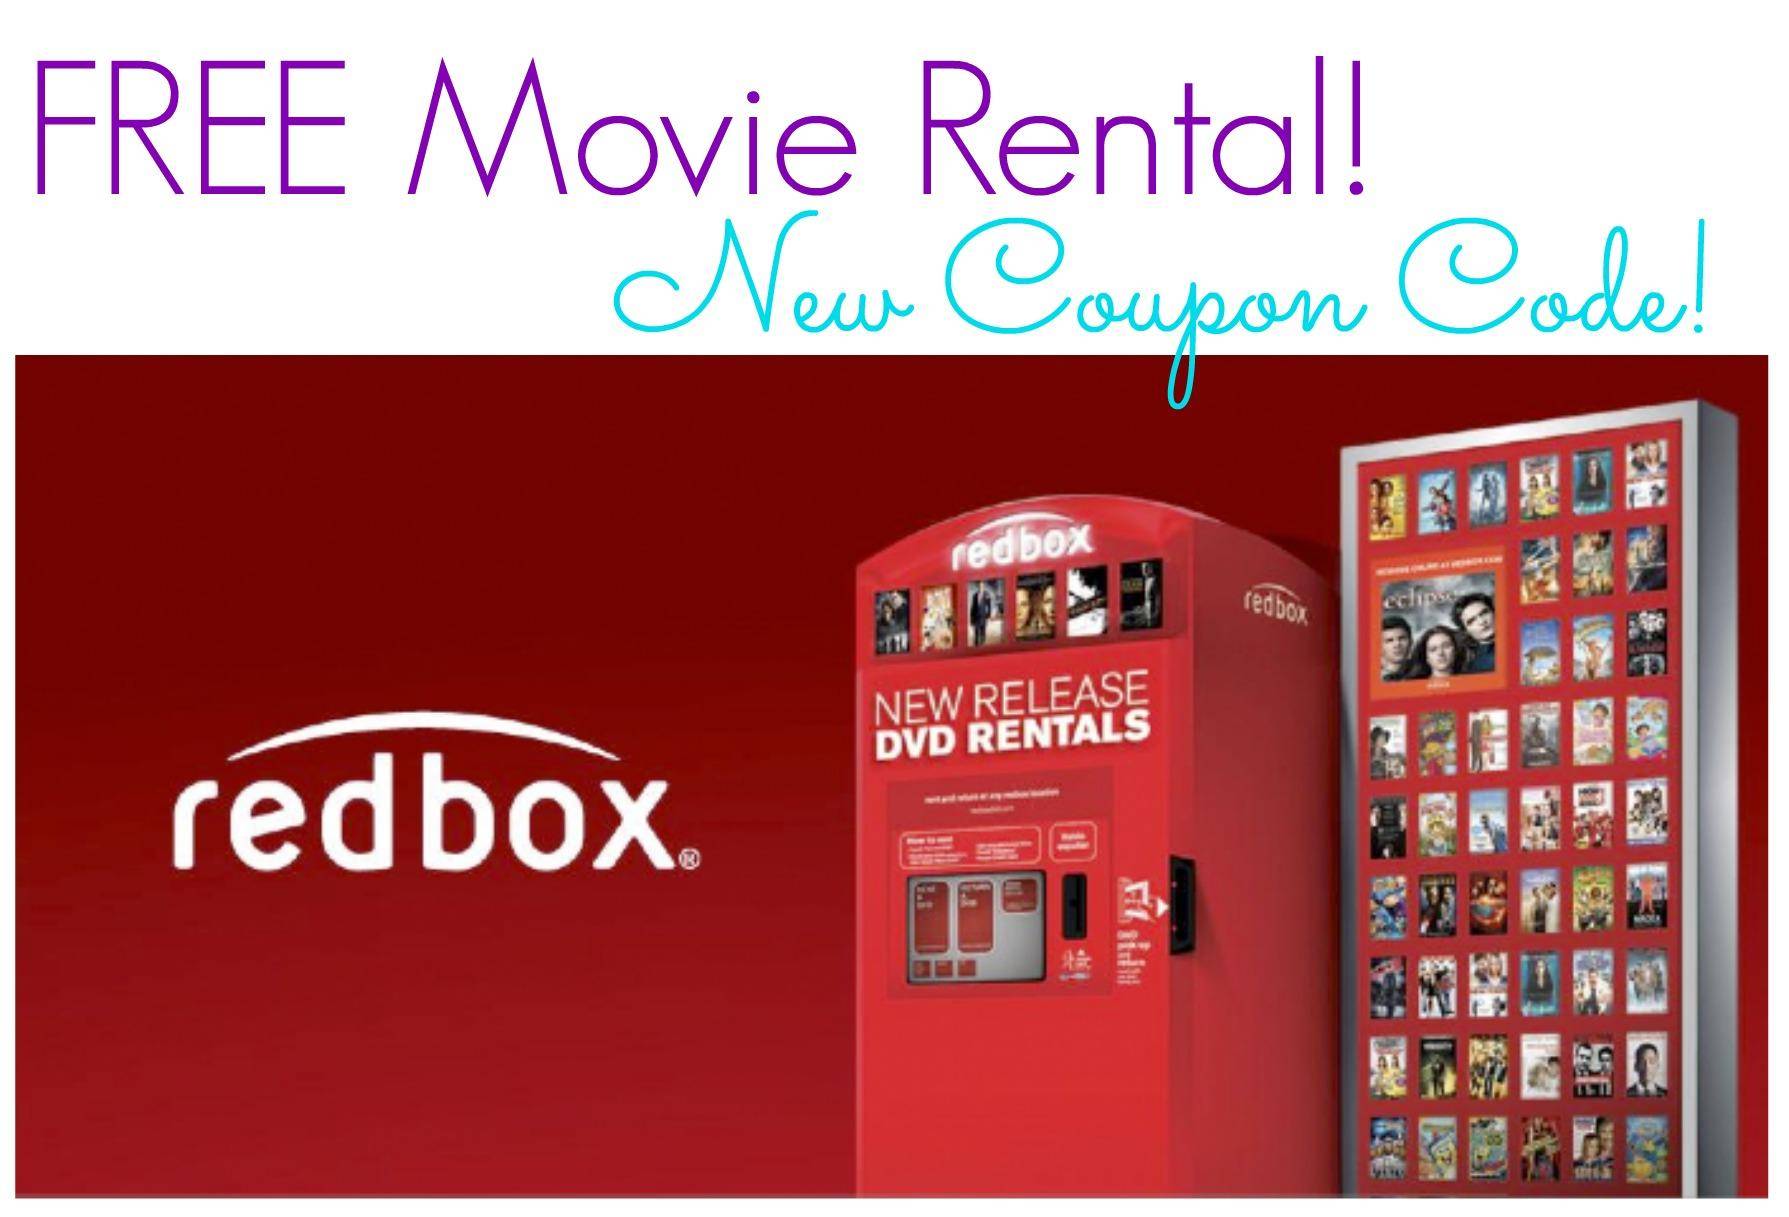 FREE Redbox Movie Rental Coupon Code! (Use up to 5 times)